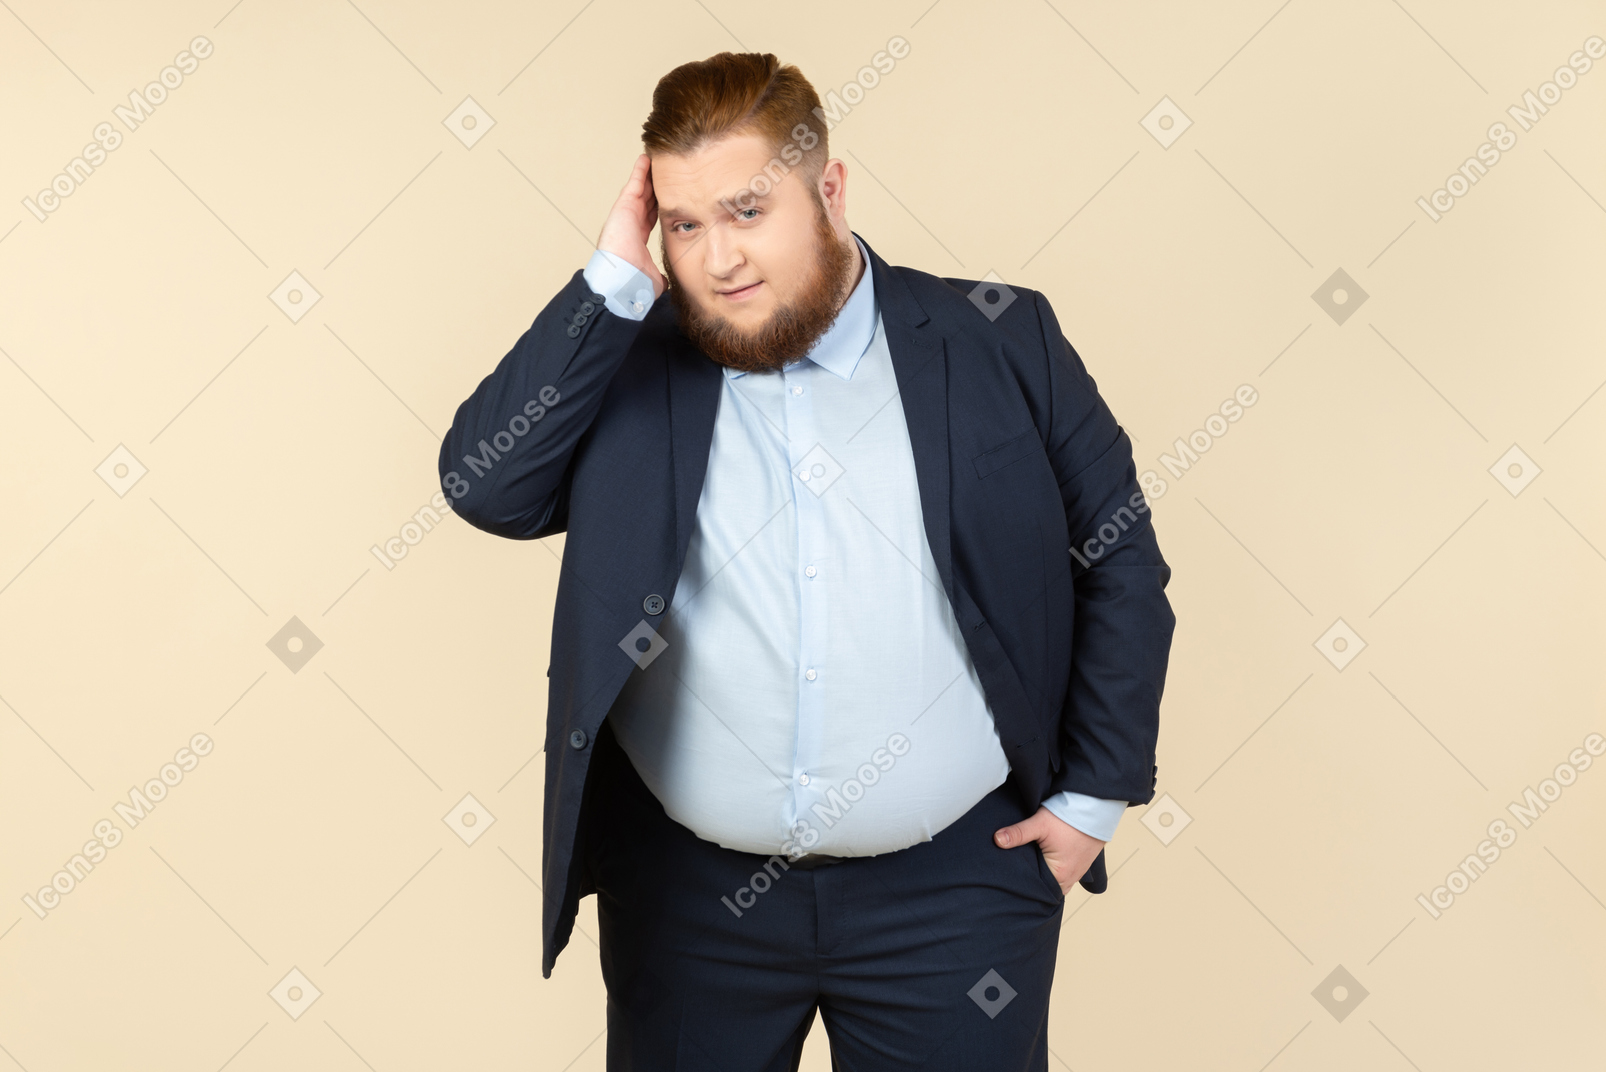 Young overweight man in suit touching head and holding one hand in pocket